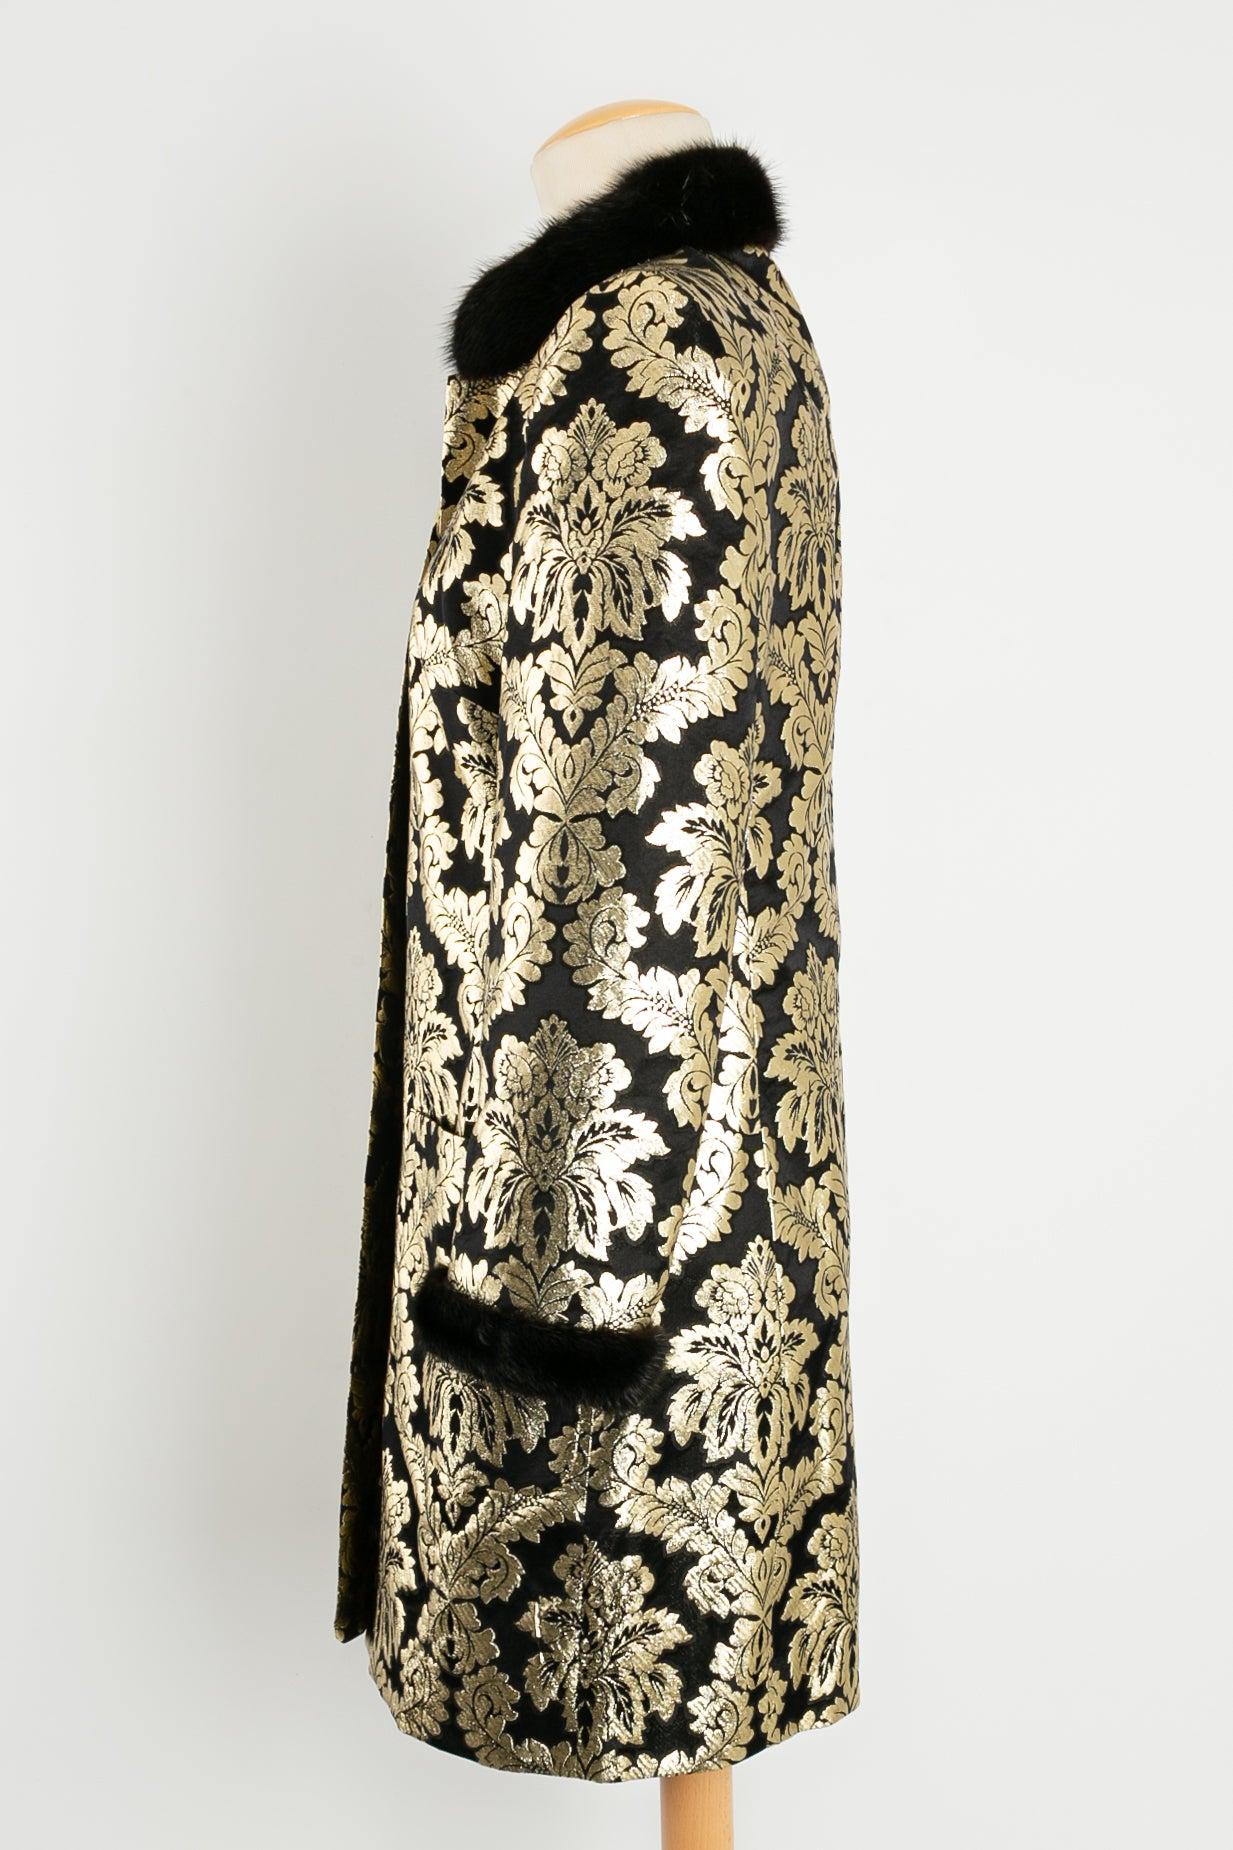 Louis Feraud - Coat in silk lamé printed with black and gold baroque patterns. The collar and the bottom of the sleeves are made of mink. Indicated size 36FR.

Additional information: 
Dimensions: Shoulders: 40 cm (15.74